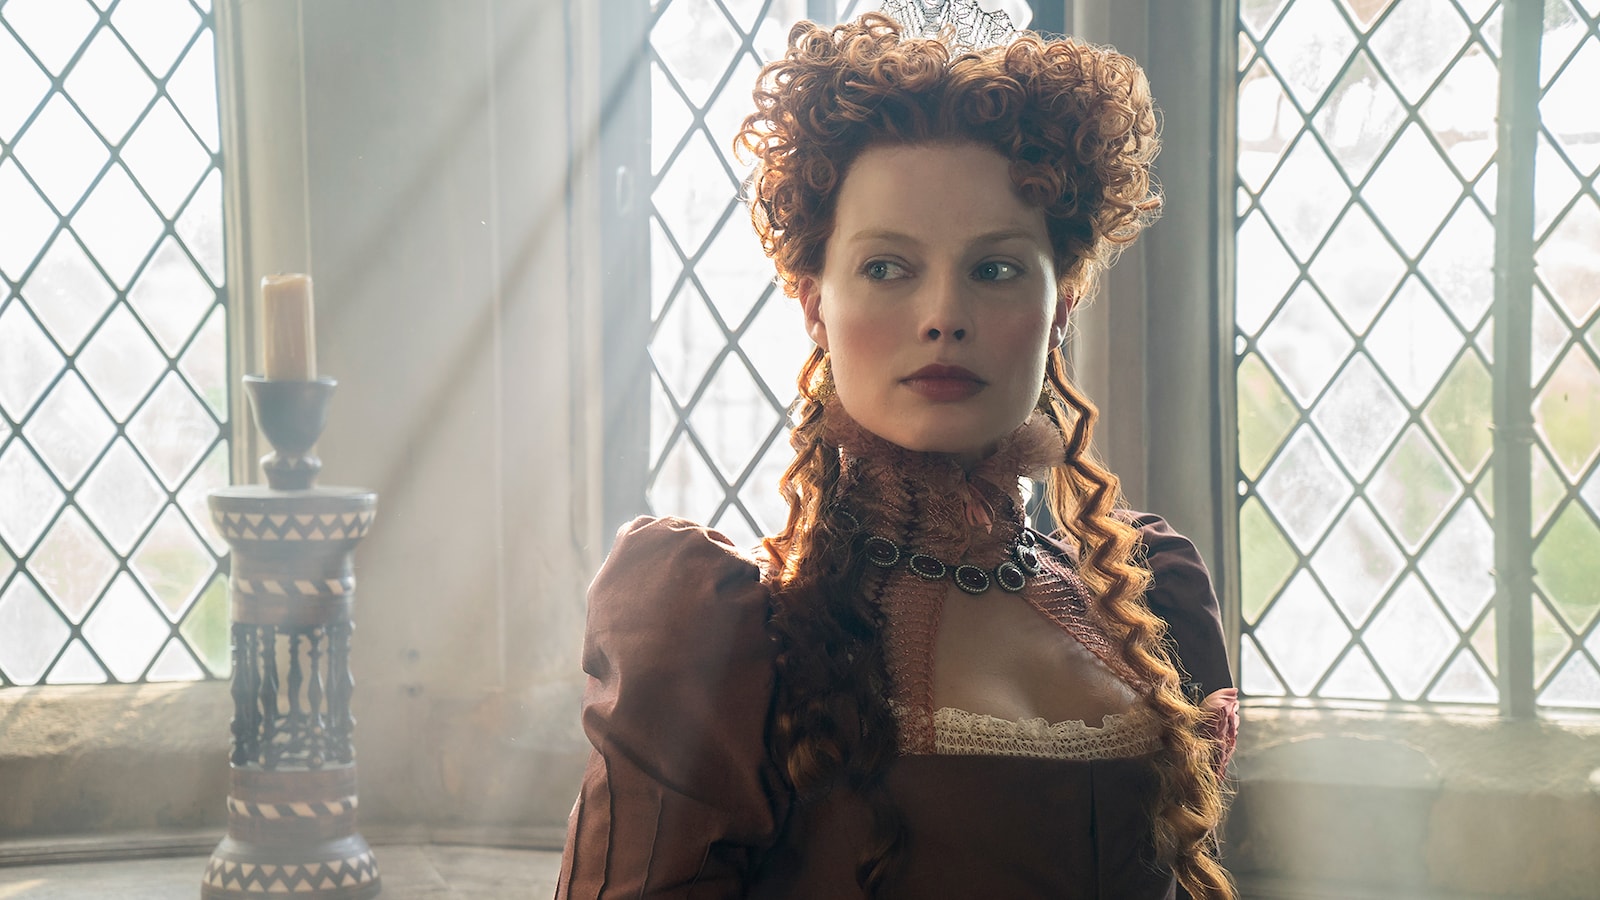 mary-queen-of-scots-2018